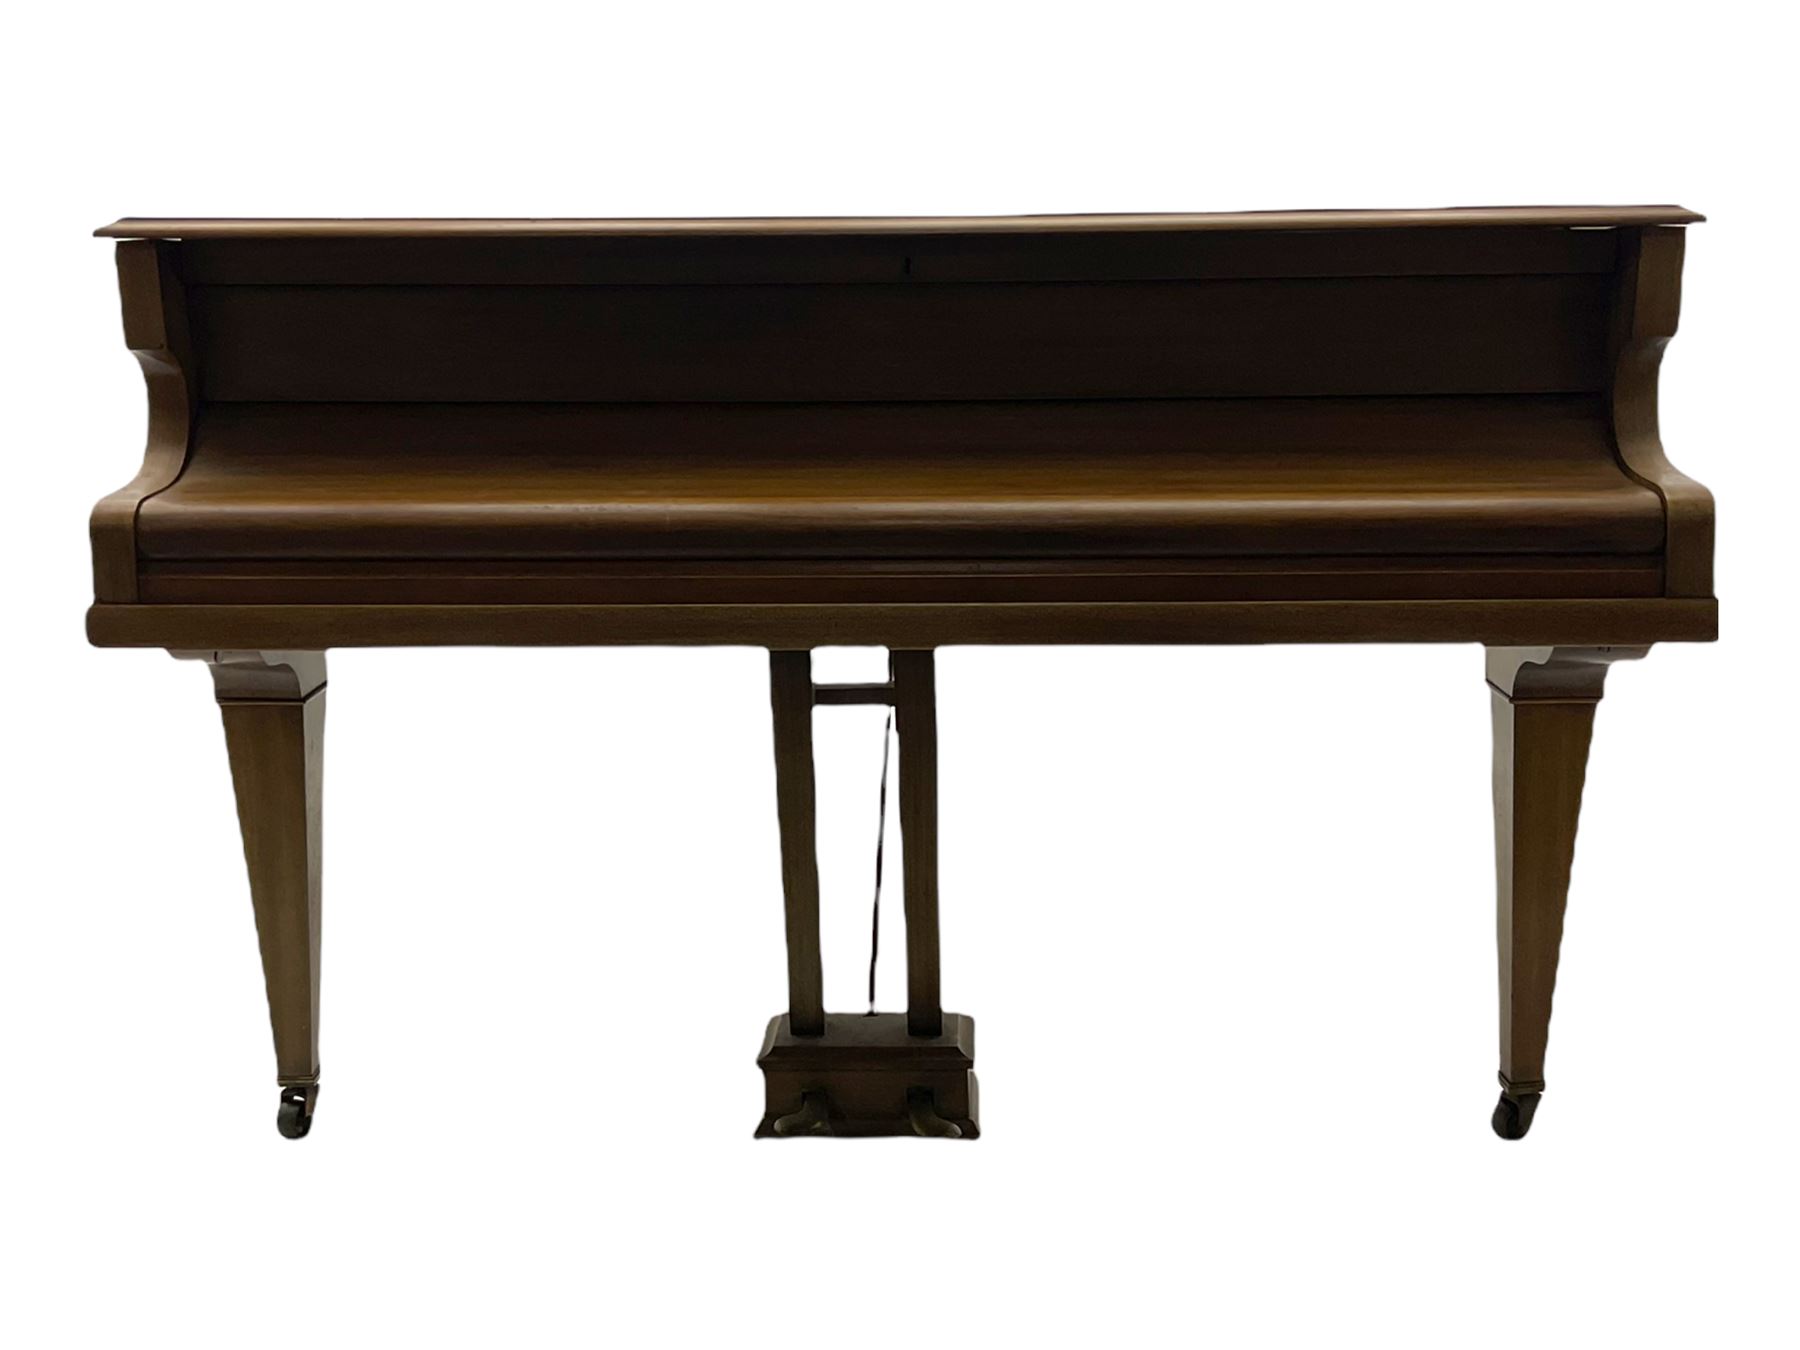 Brindley & Foster mahogany cased baby grand piano - Image 2 of 10